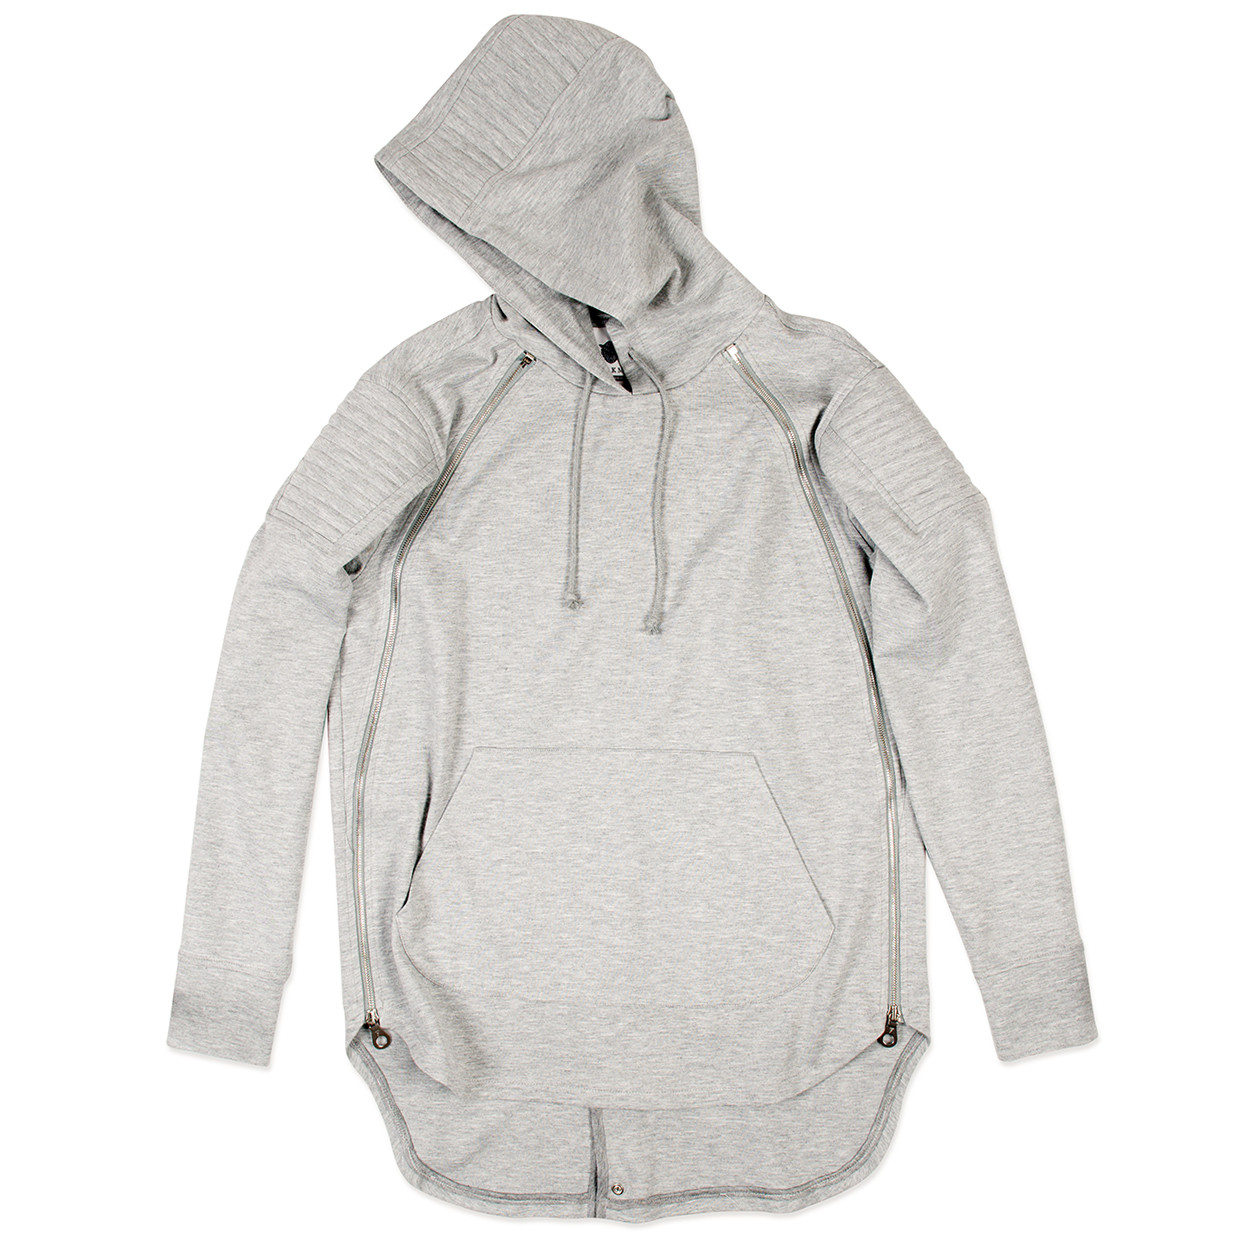 TACKMA RULING STEALTH HOODIE | AmgLifestyle